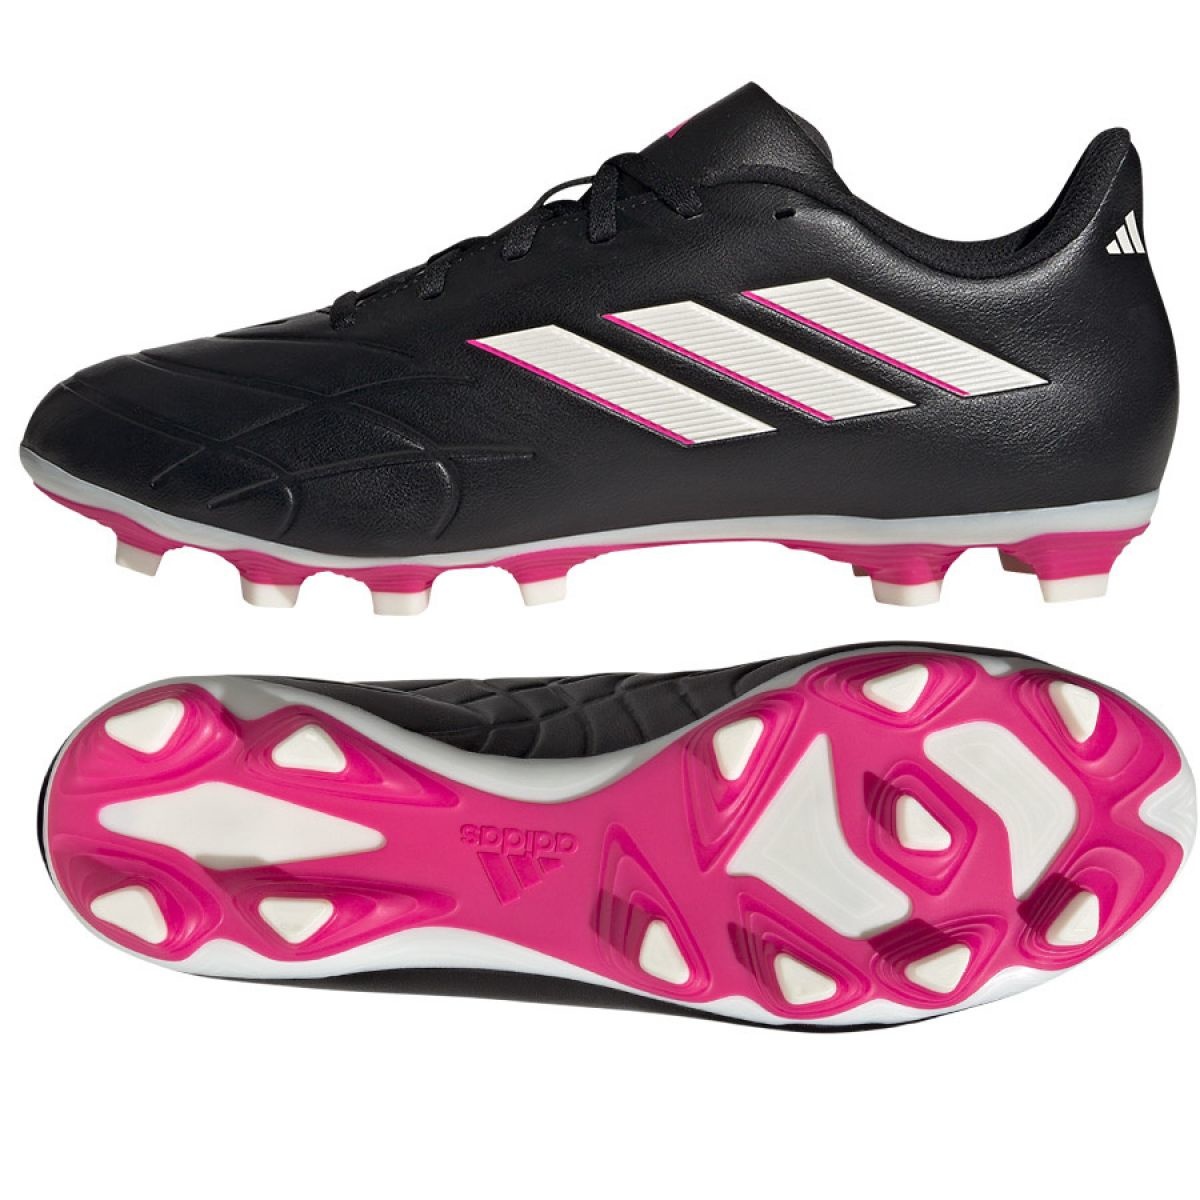 adidas Copa Soccer Calf Sleeve (2-Pieces) to be Worn Over Guards